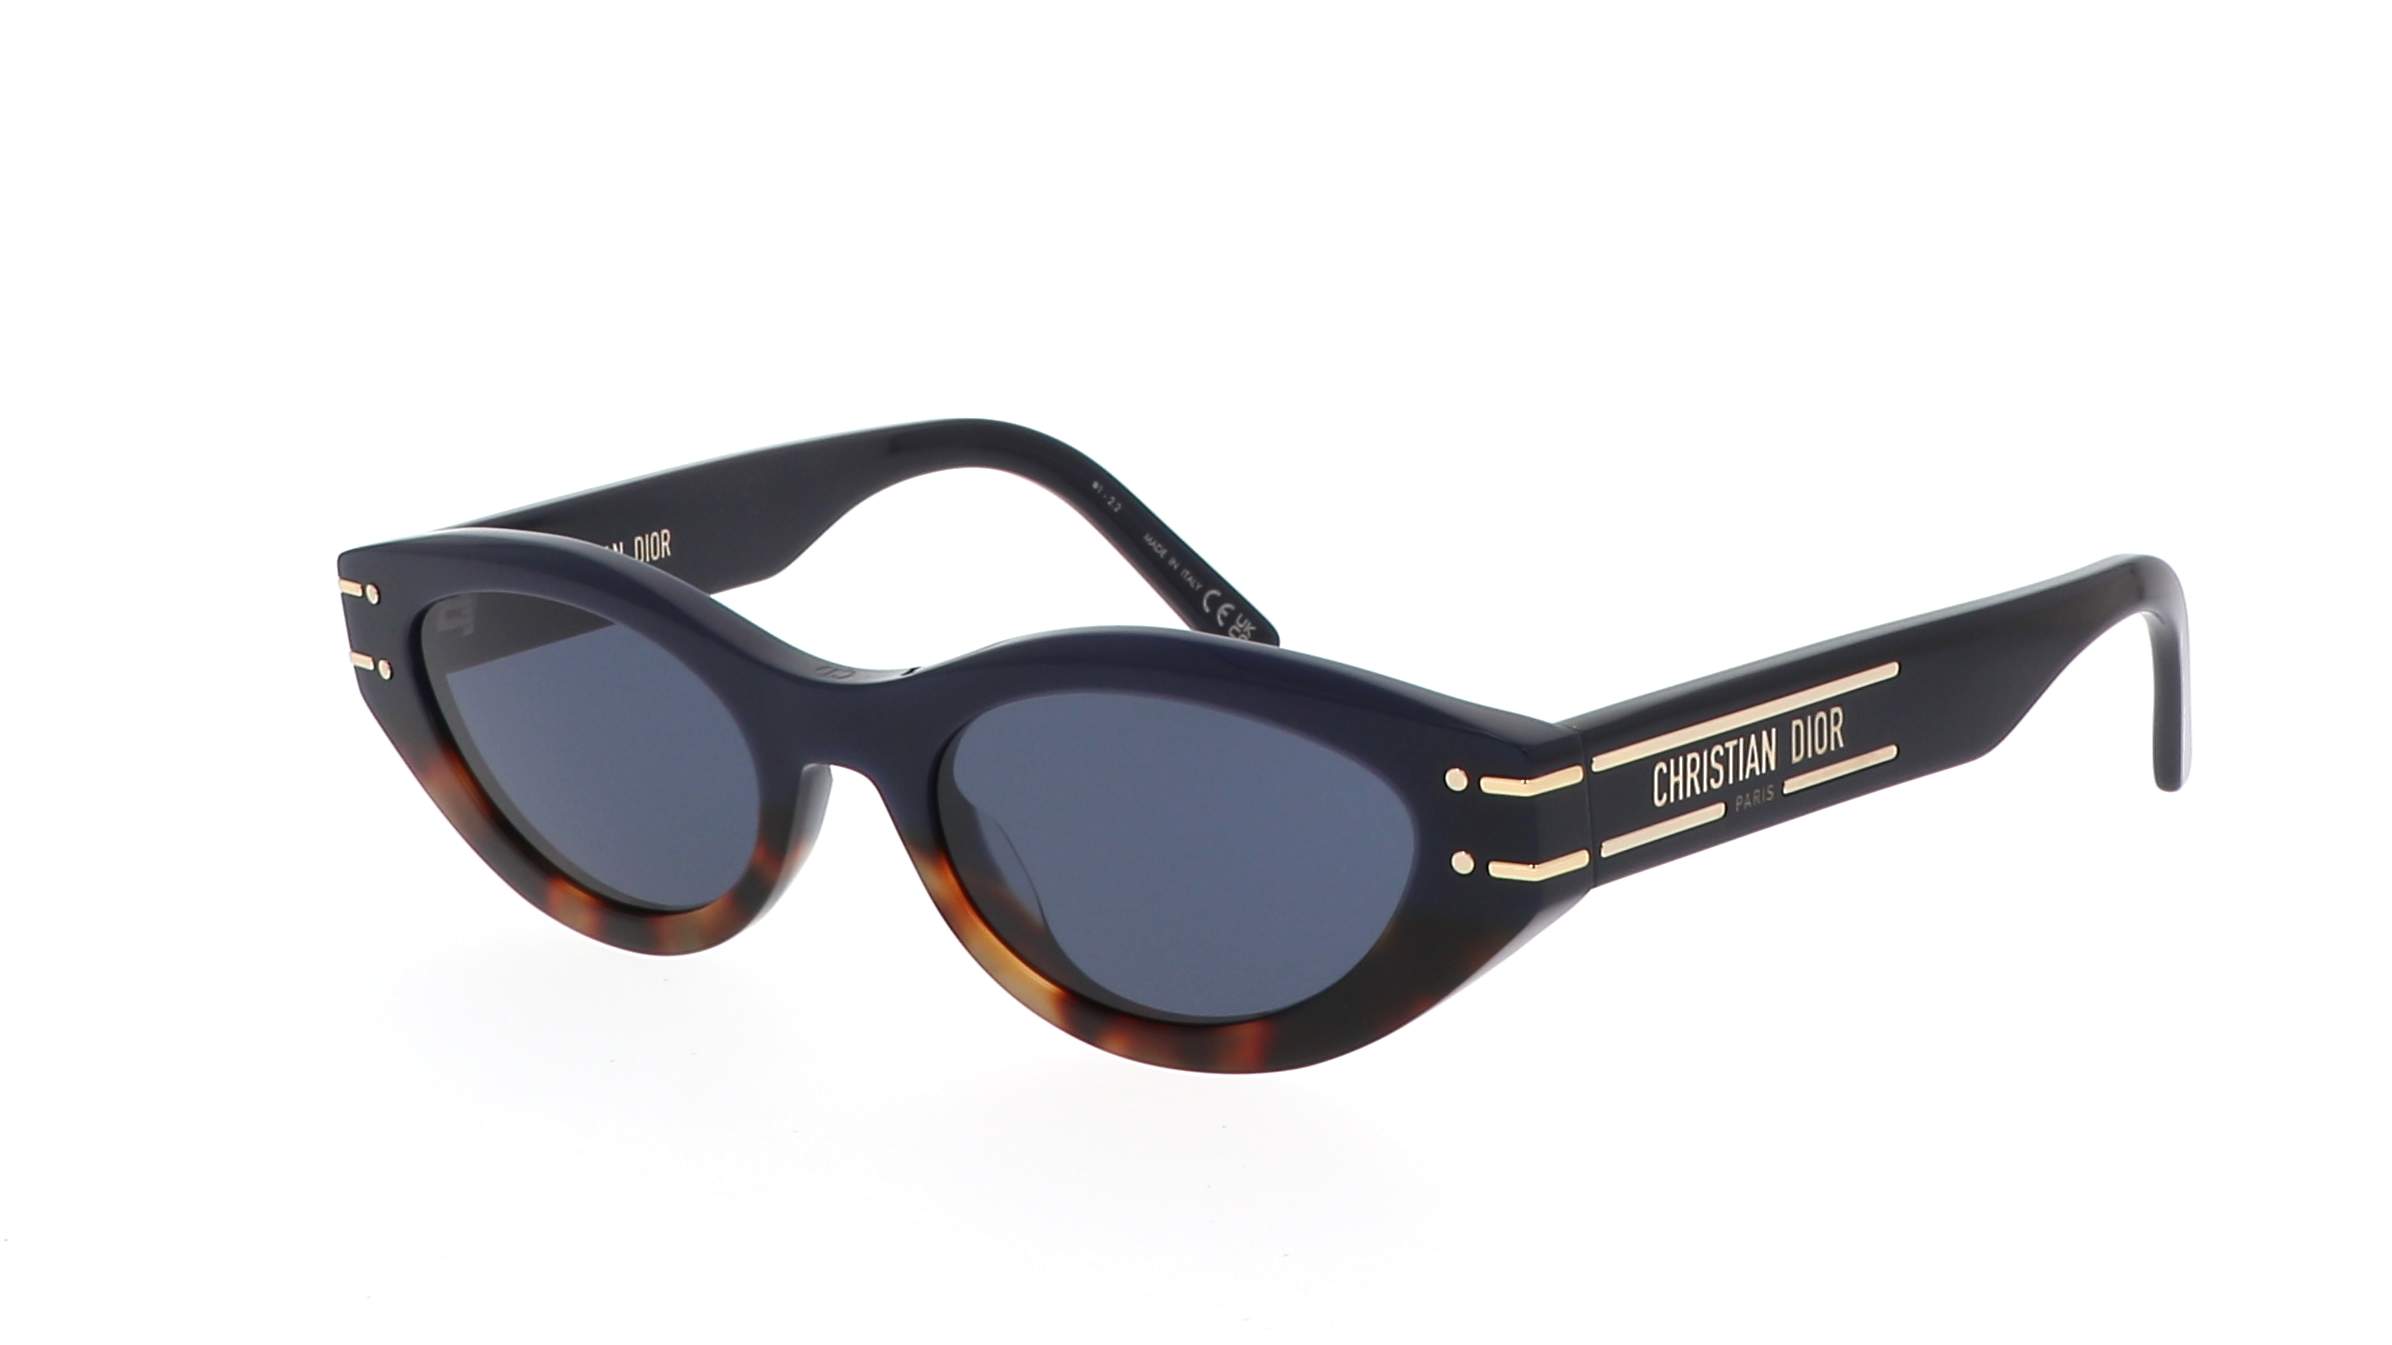 Top more than 124 dior sunglasses official website latest